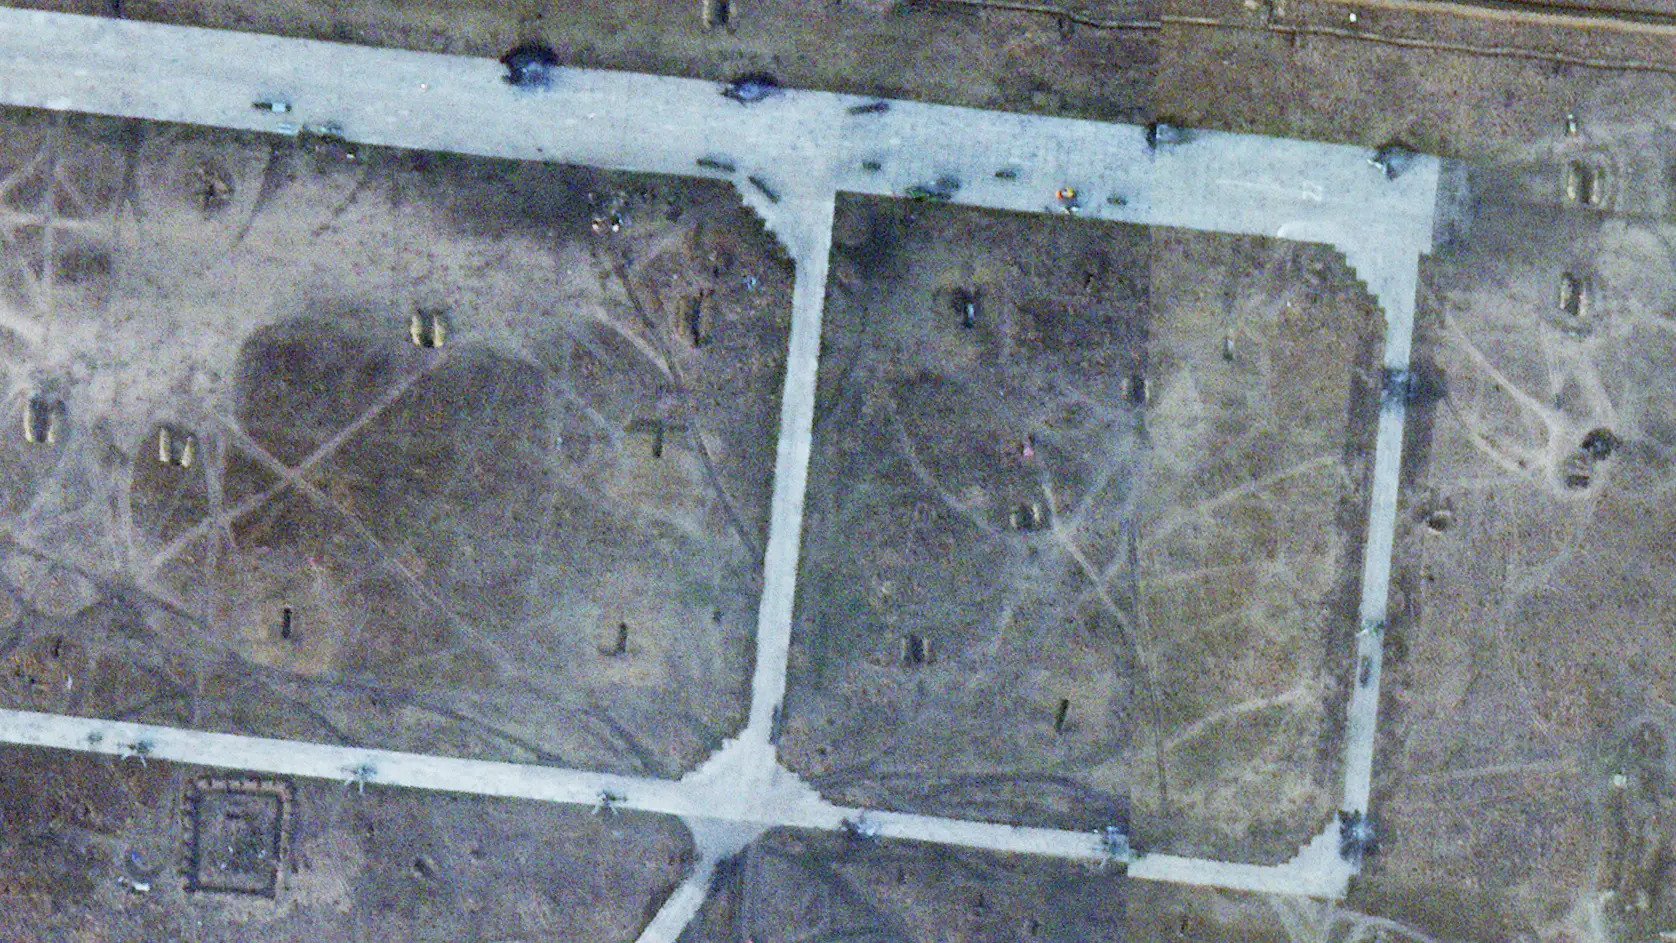 How ATACMS destroyed Russian helicopters: Satellite images